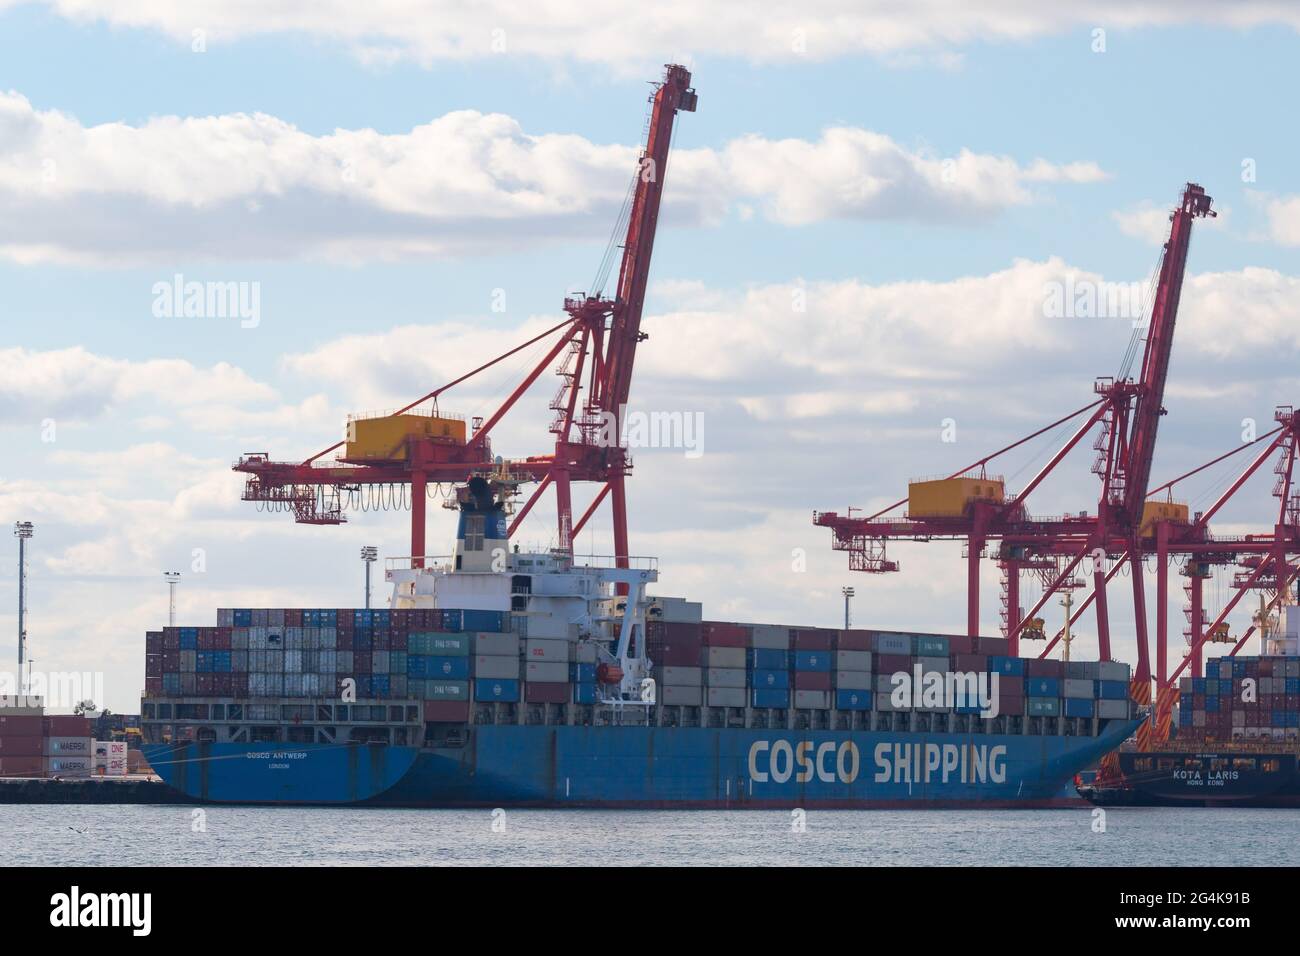 Containership Cosco Antwerp in Fremantle Inner Harbour, WA on 2 June 2021. Stock Photo